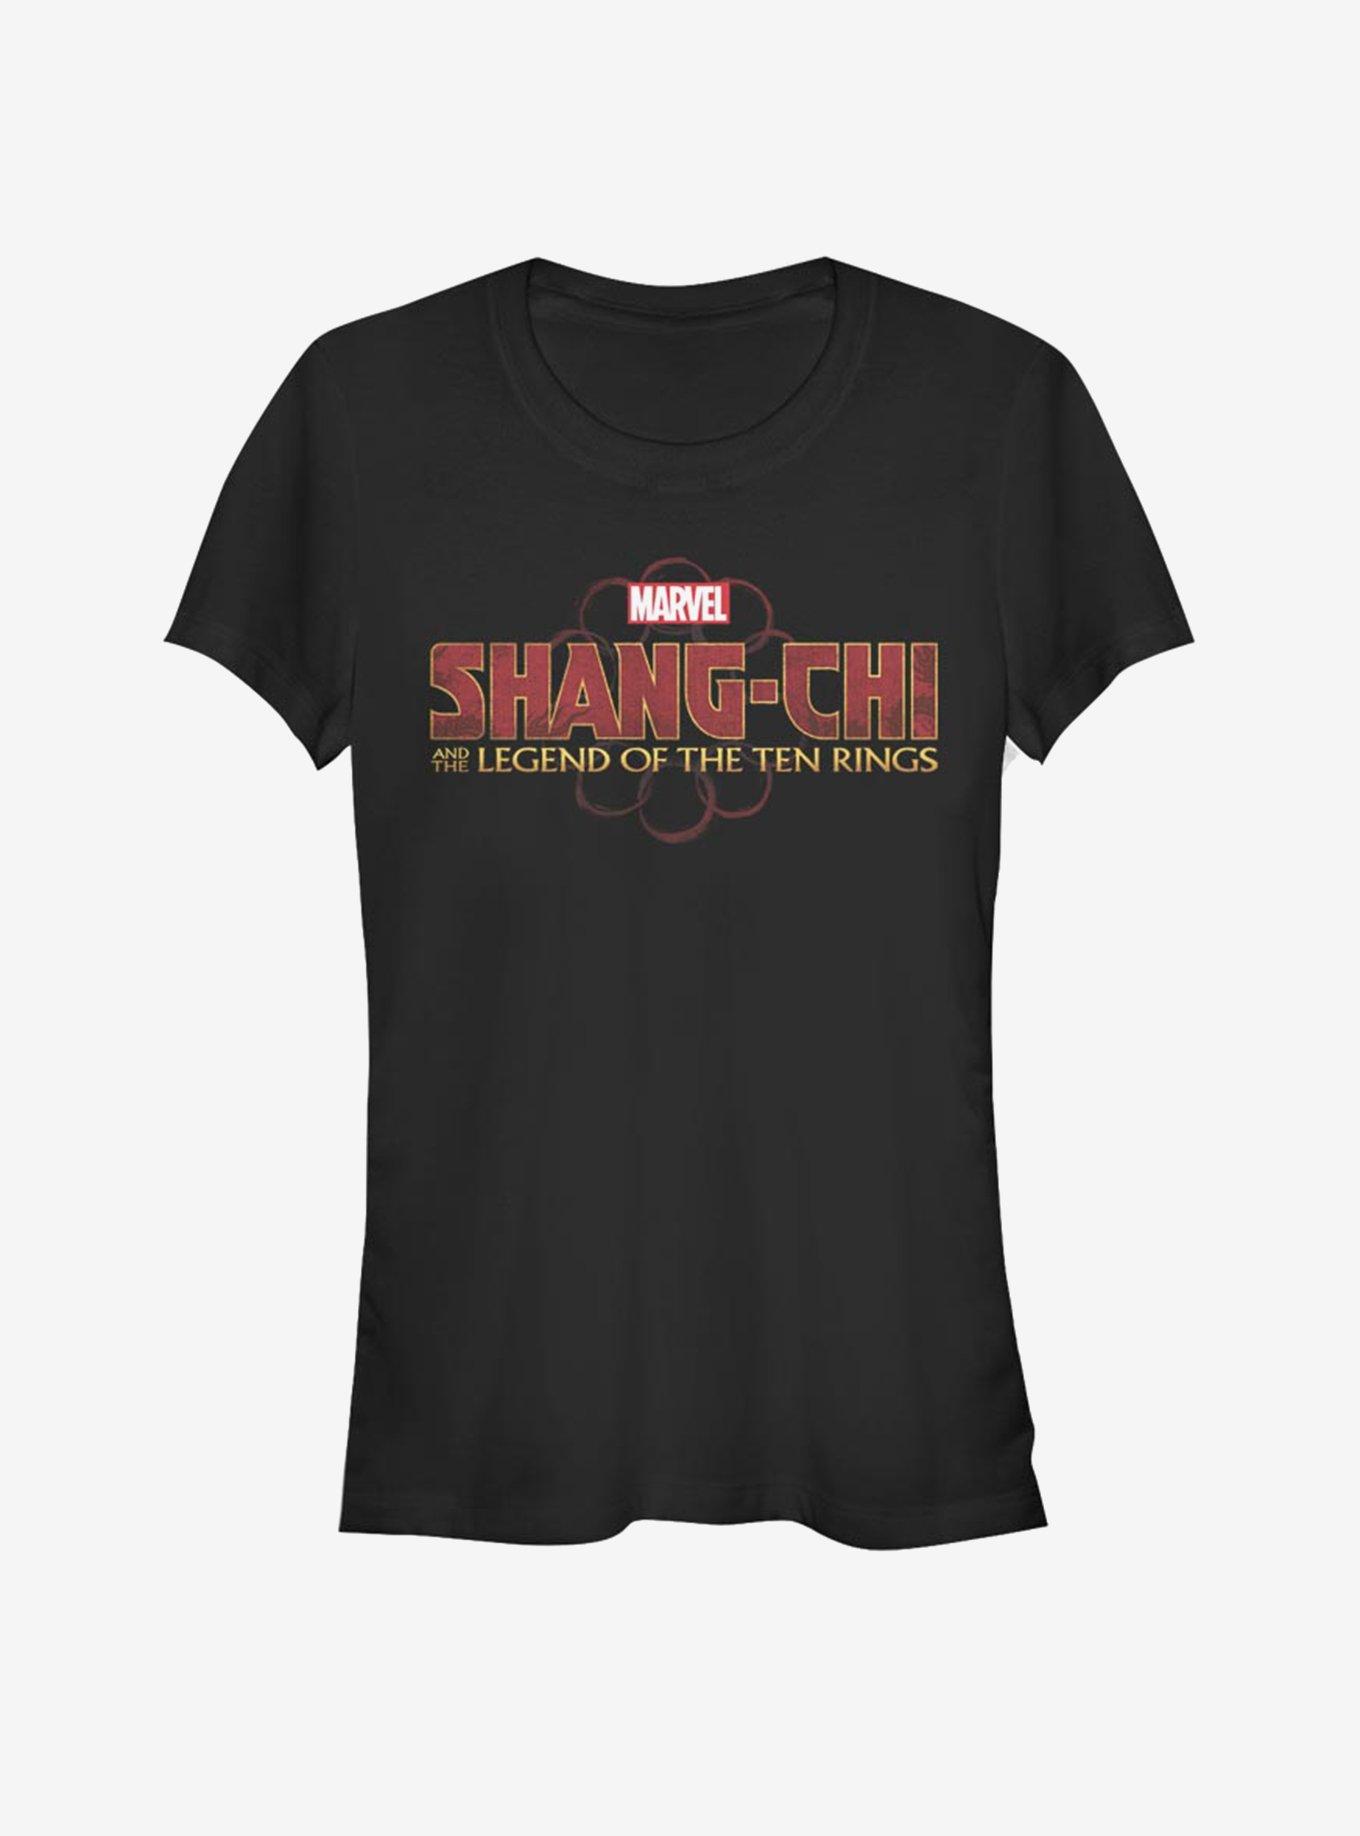 Marvel Shang-Chi And The Legend Of Ten Rings Girls T-Shirt